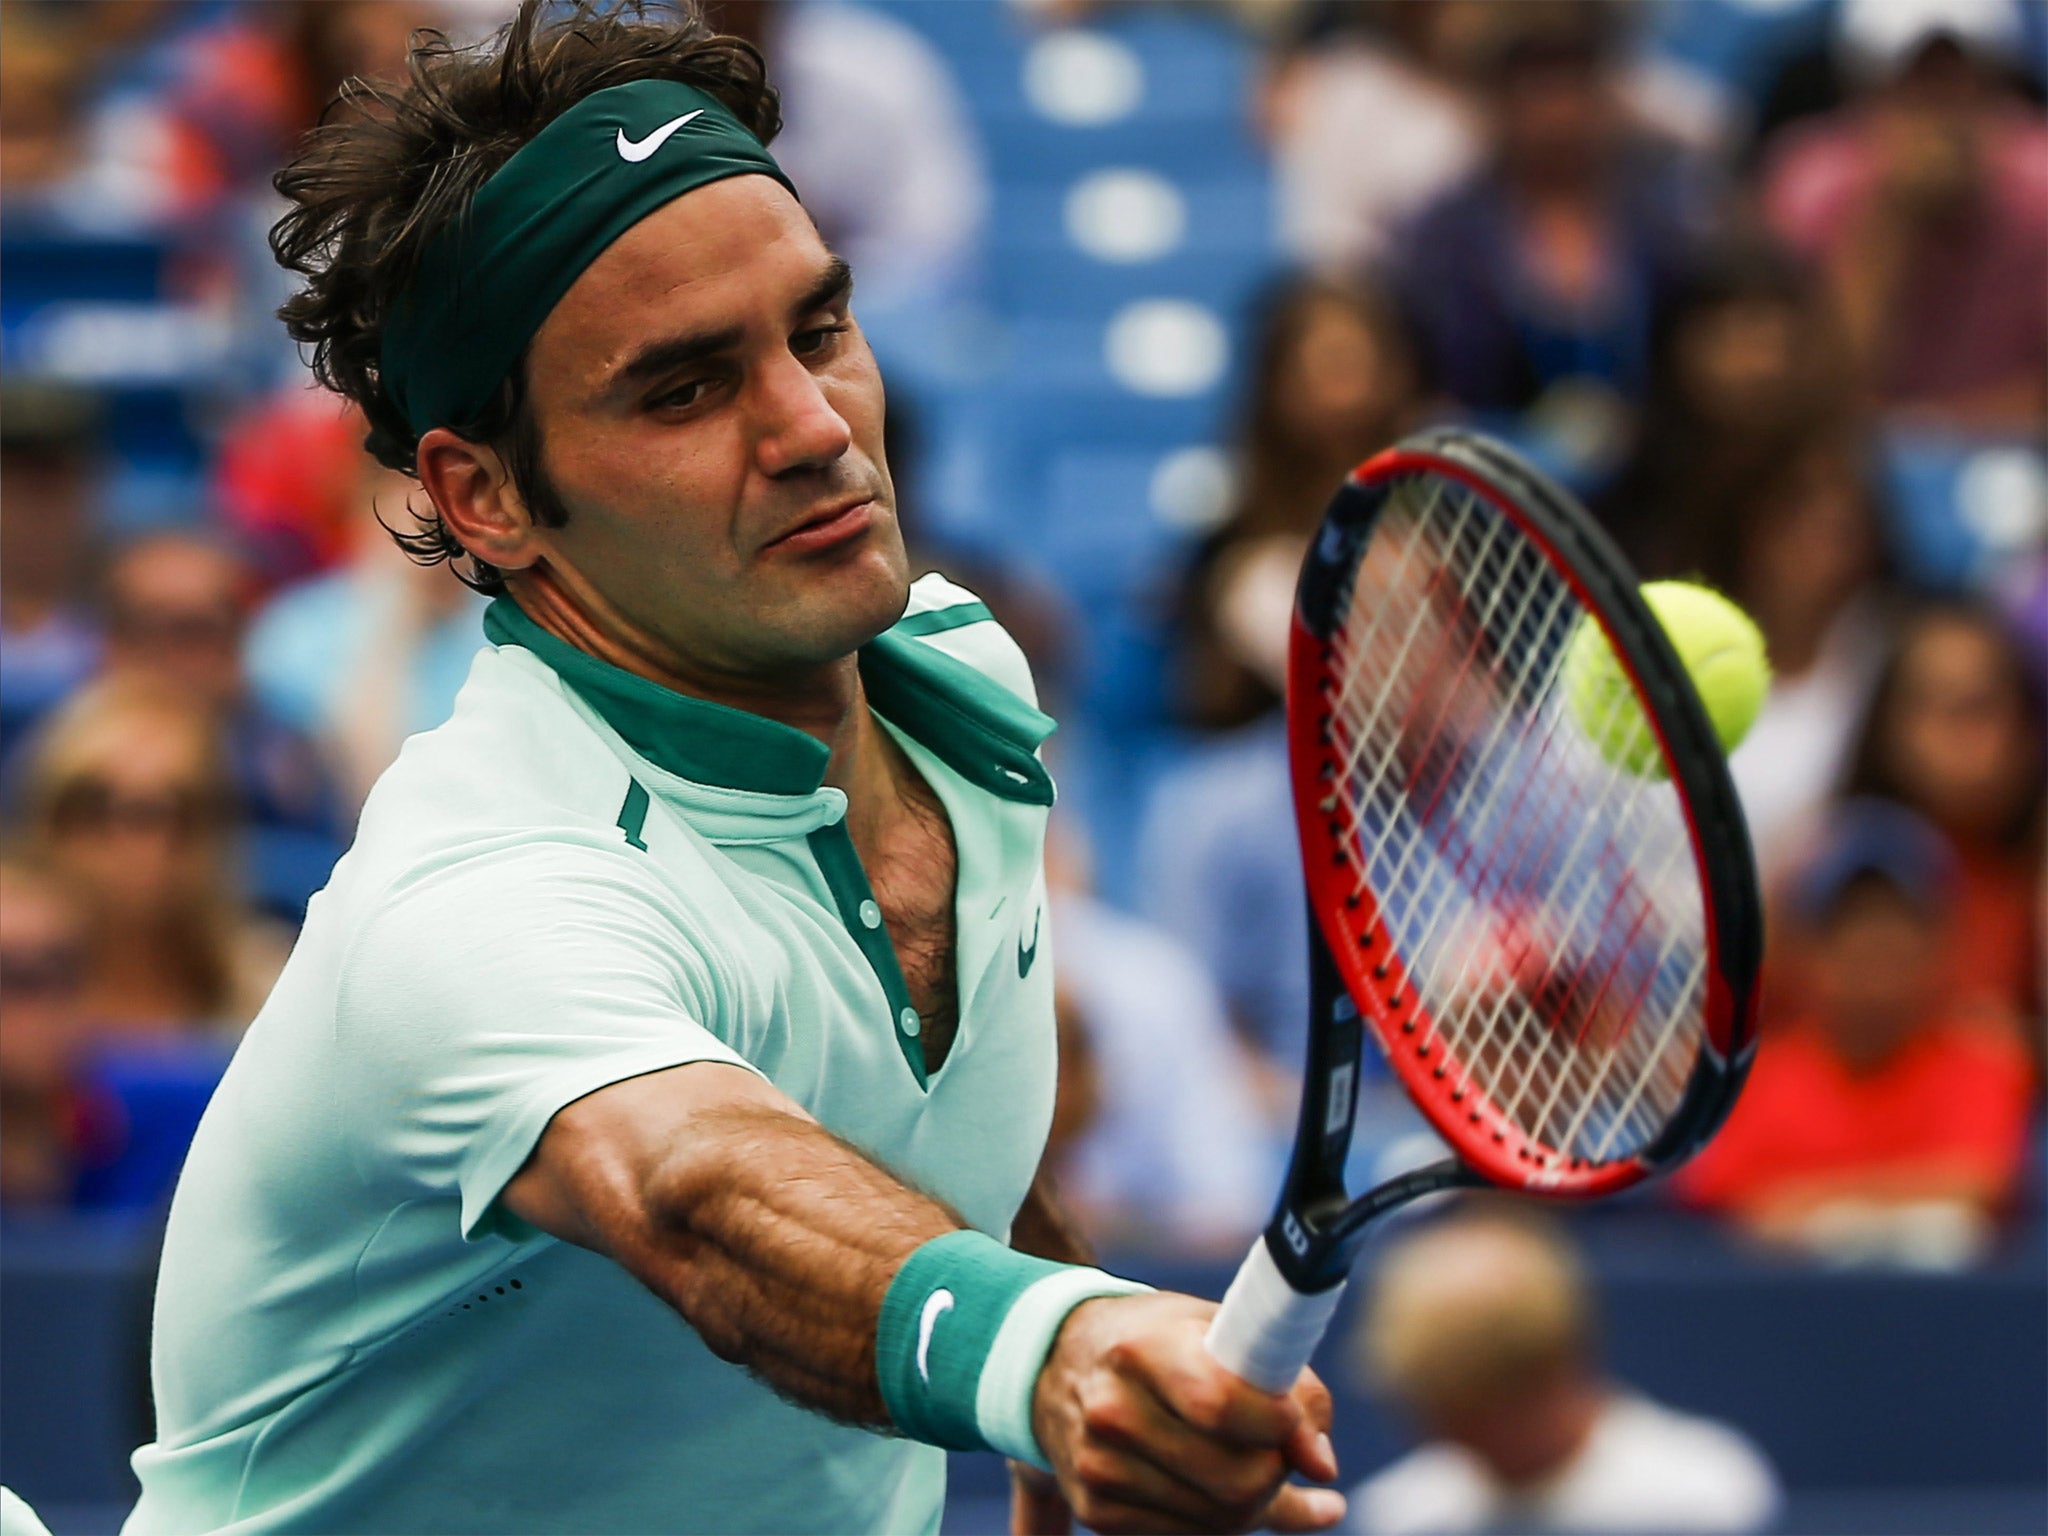 Roger Federer has credited coach Stefan Edberg for his upturn in form this year, resulting in him being installed as second favourite to win the 2014 US Open